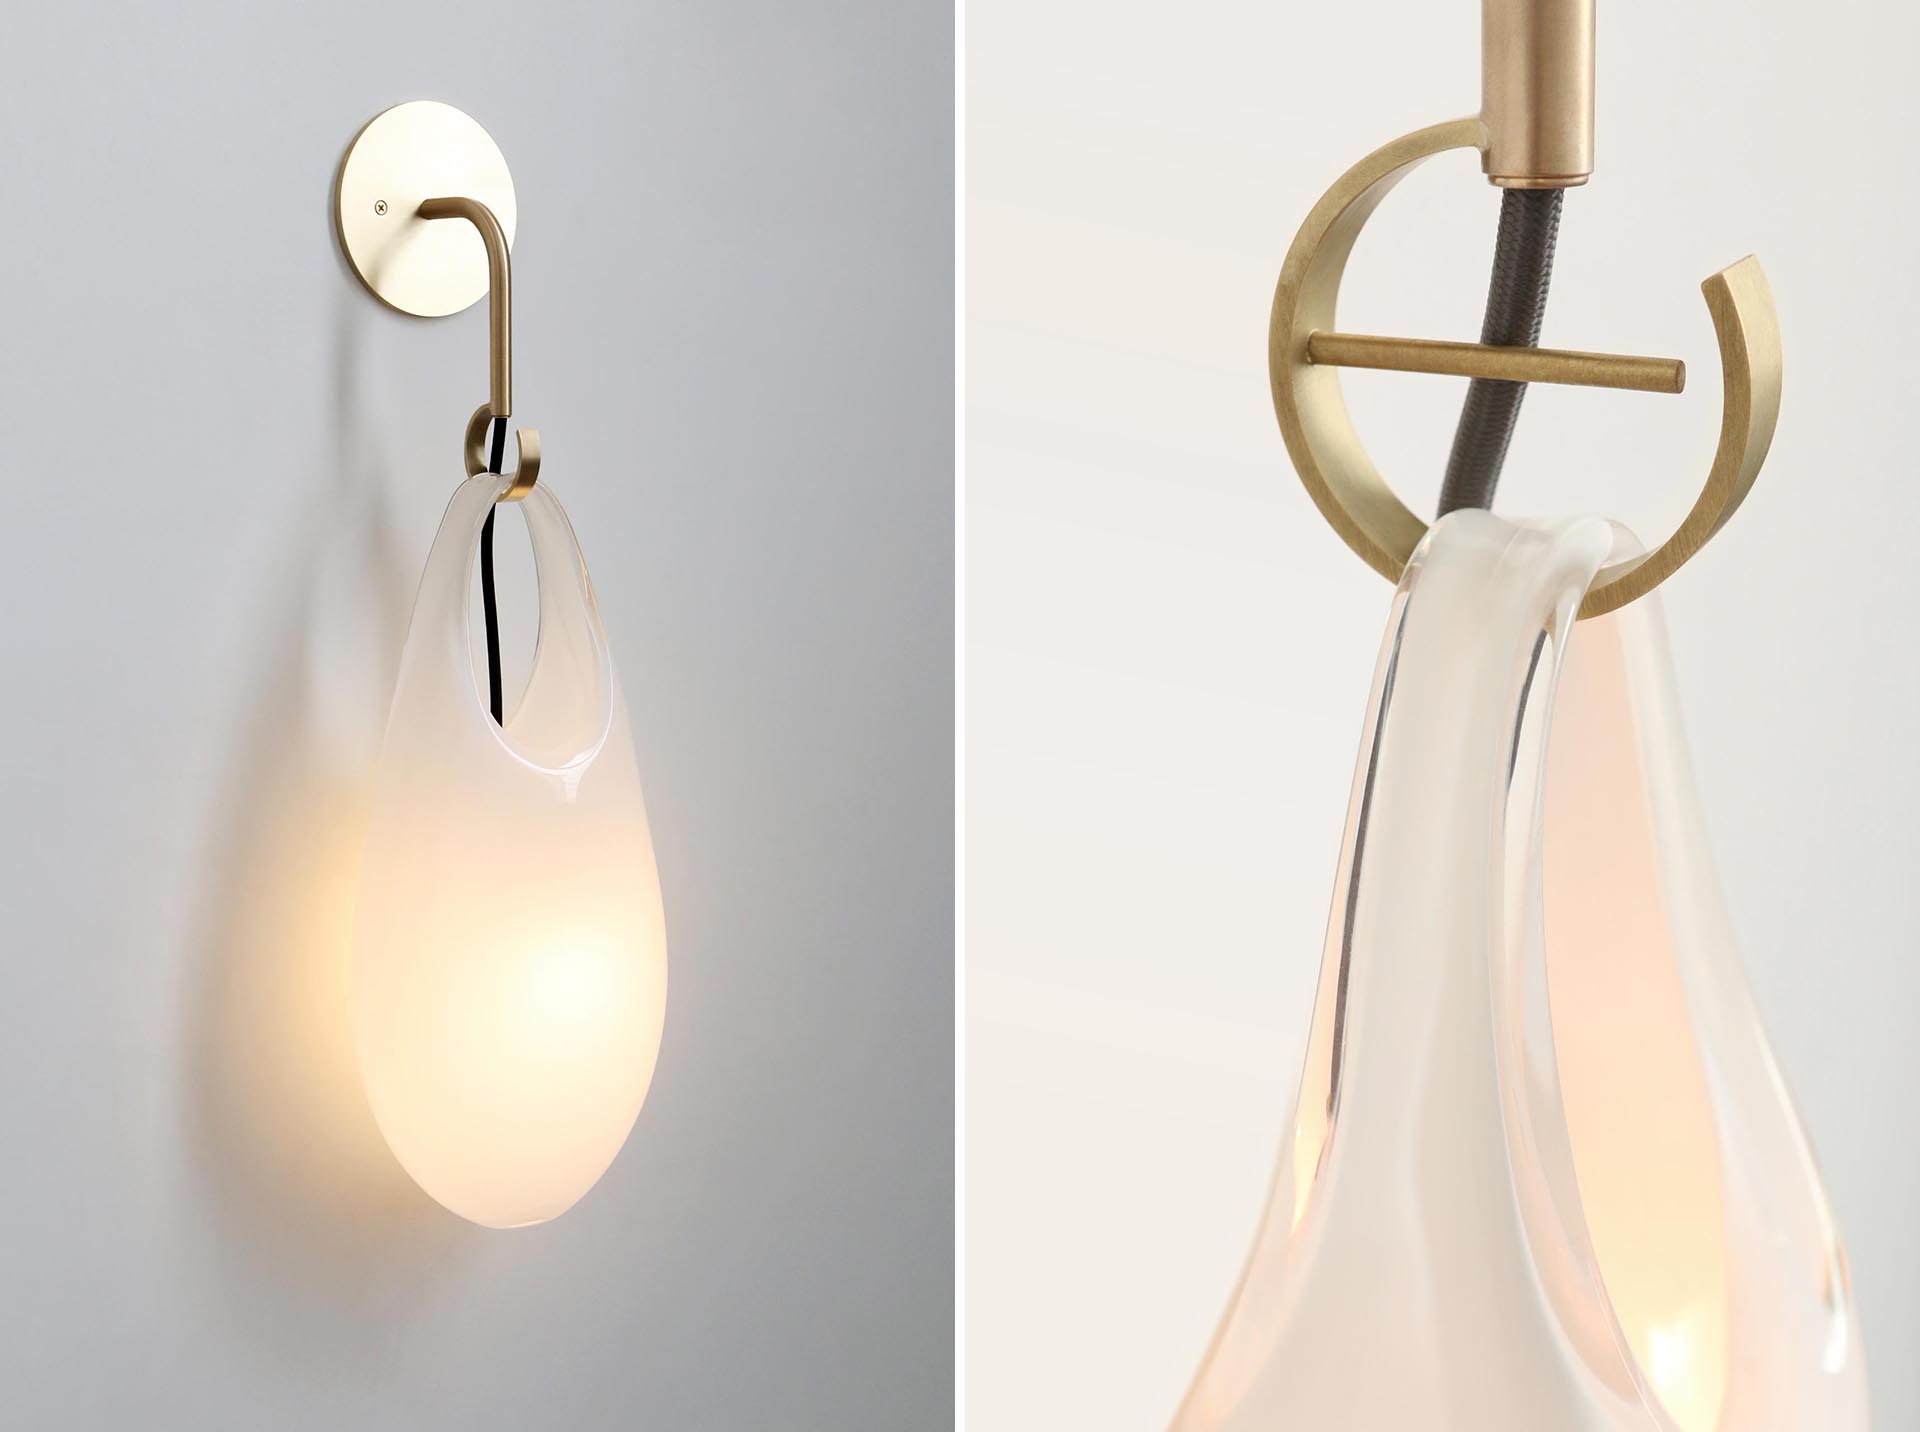 The Hold pendant lights and sconces, are modern handblown glass lights that look like they're hanging from hooks.